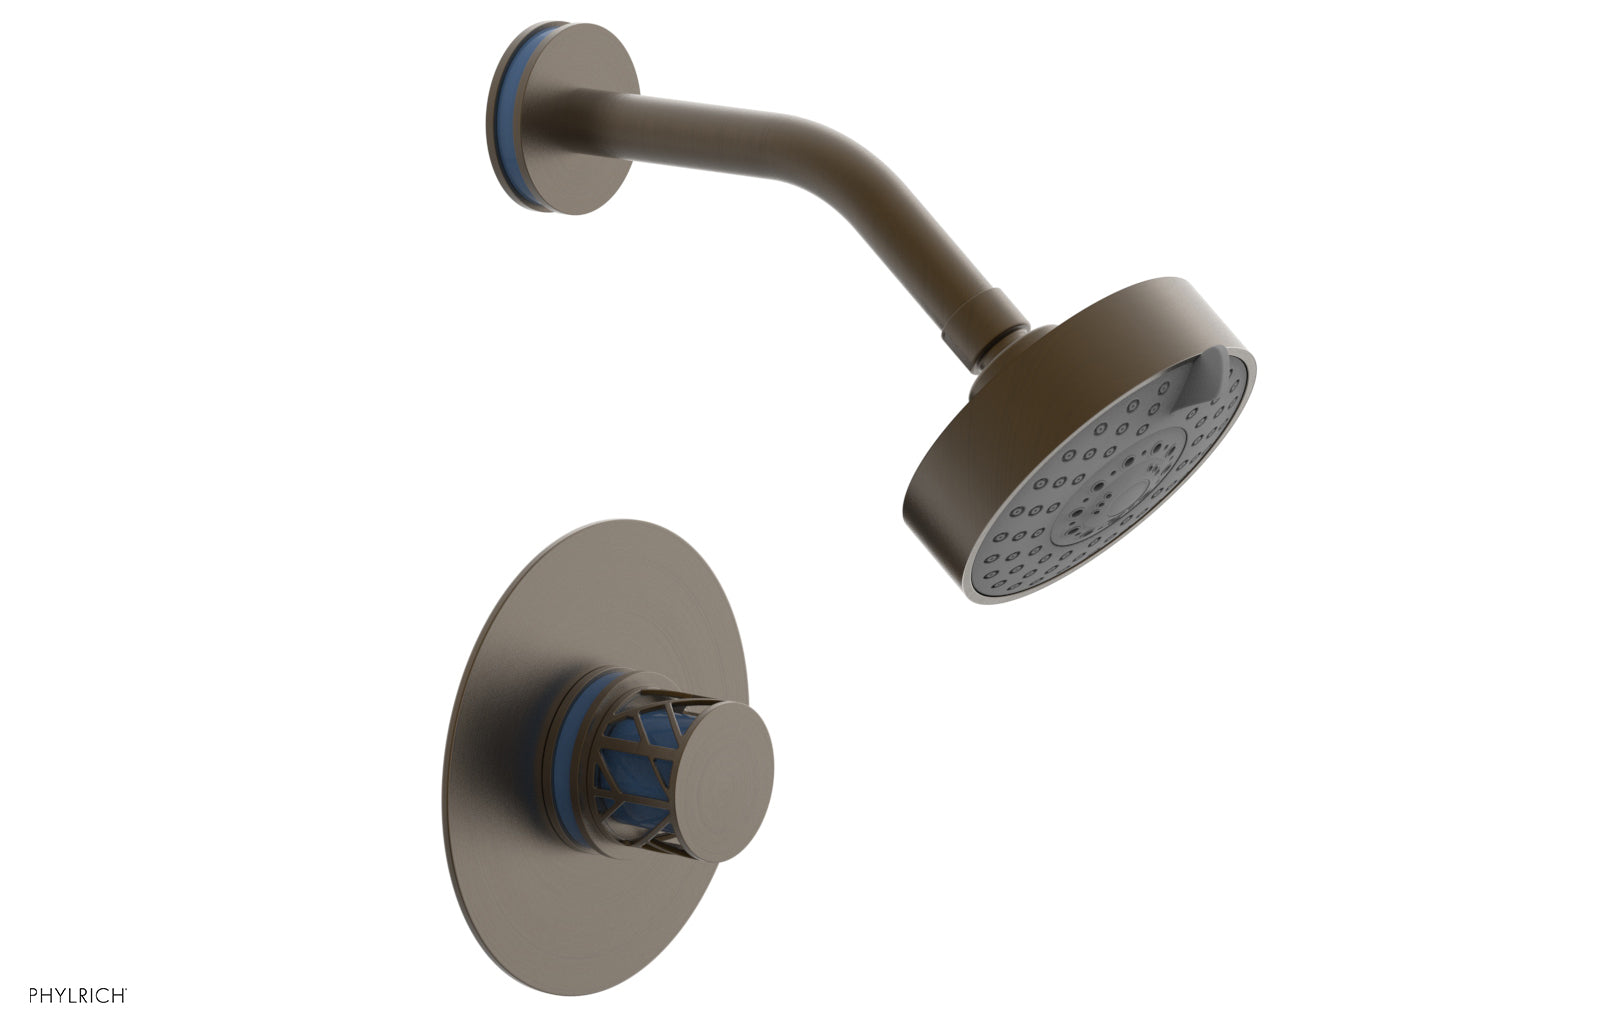 Phylrich JOLIE Pressure Balance Shower Set - Round Handle with "Light Blue" Accents